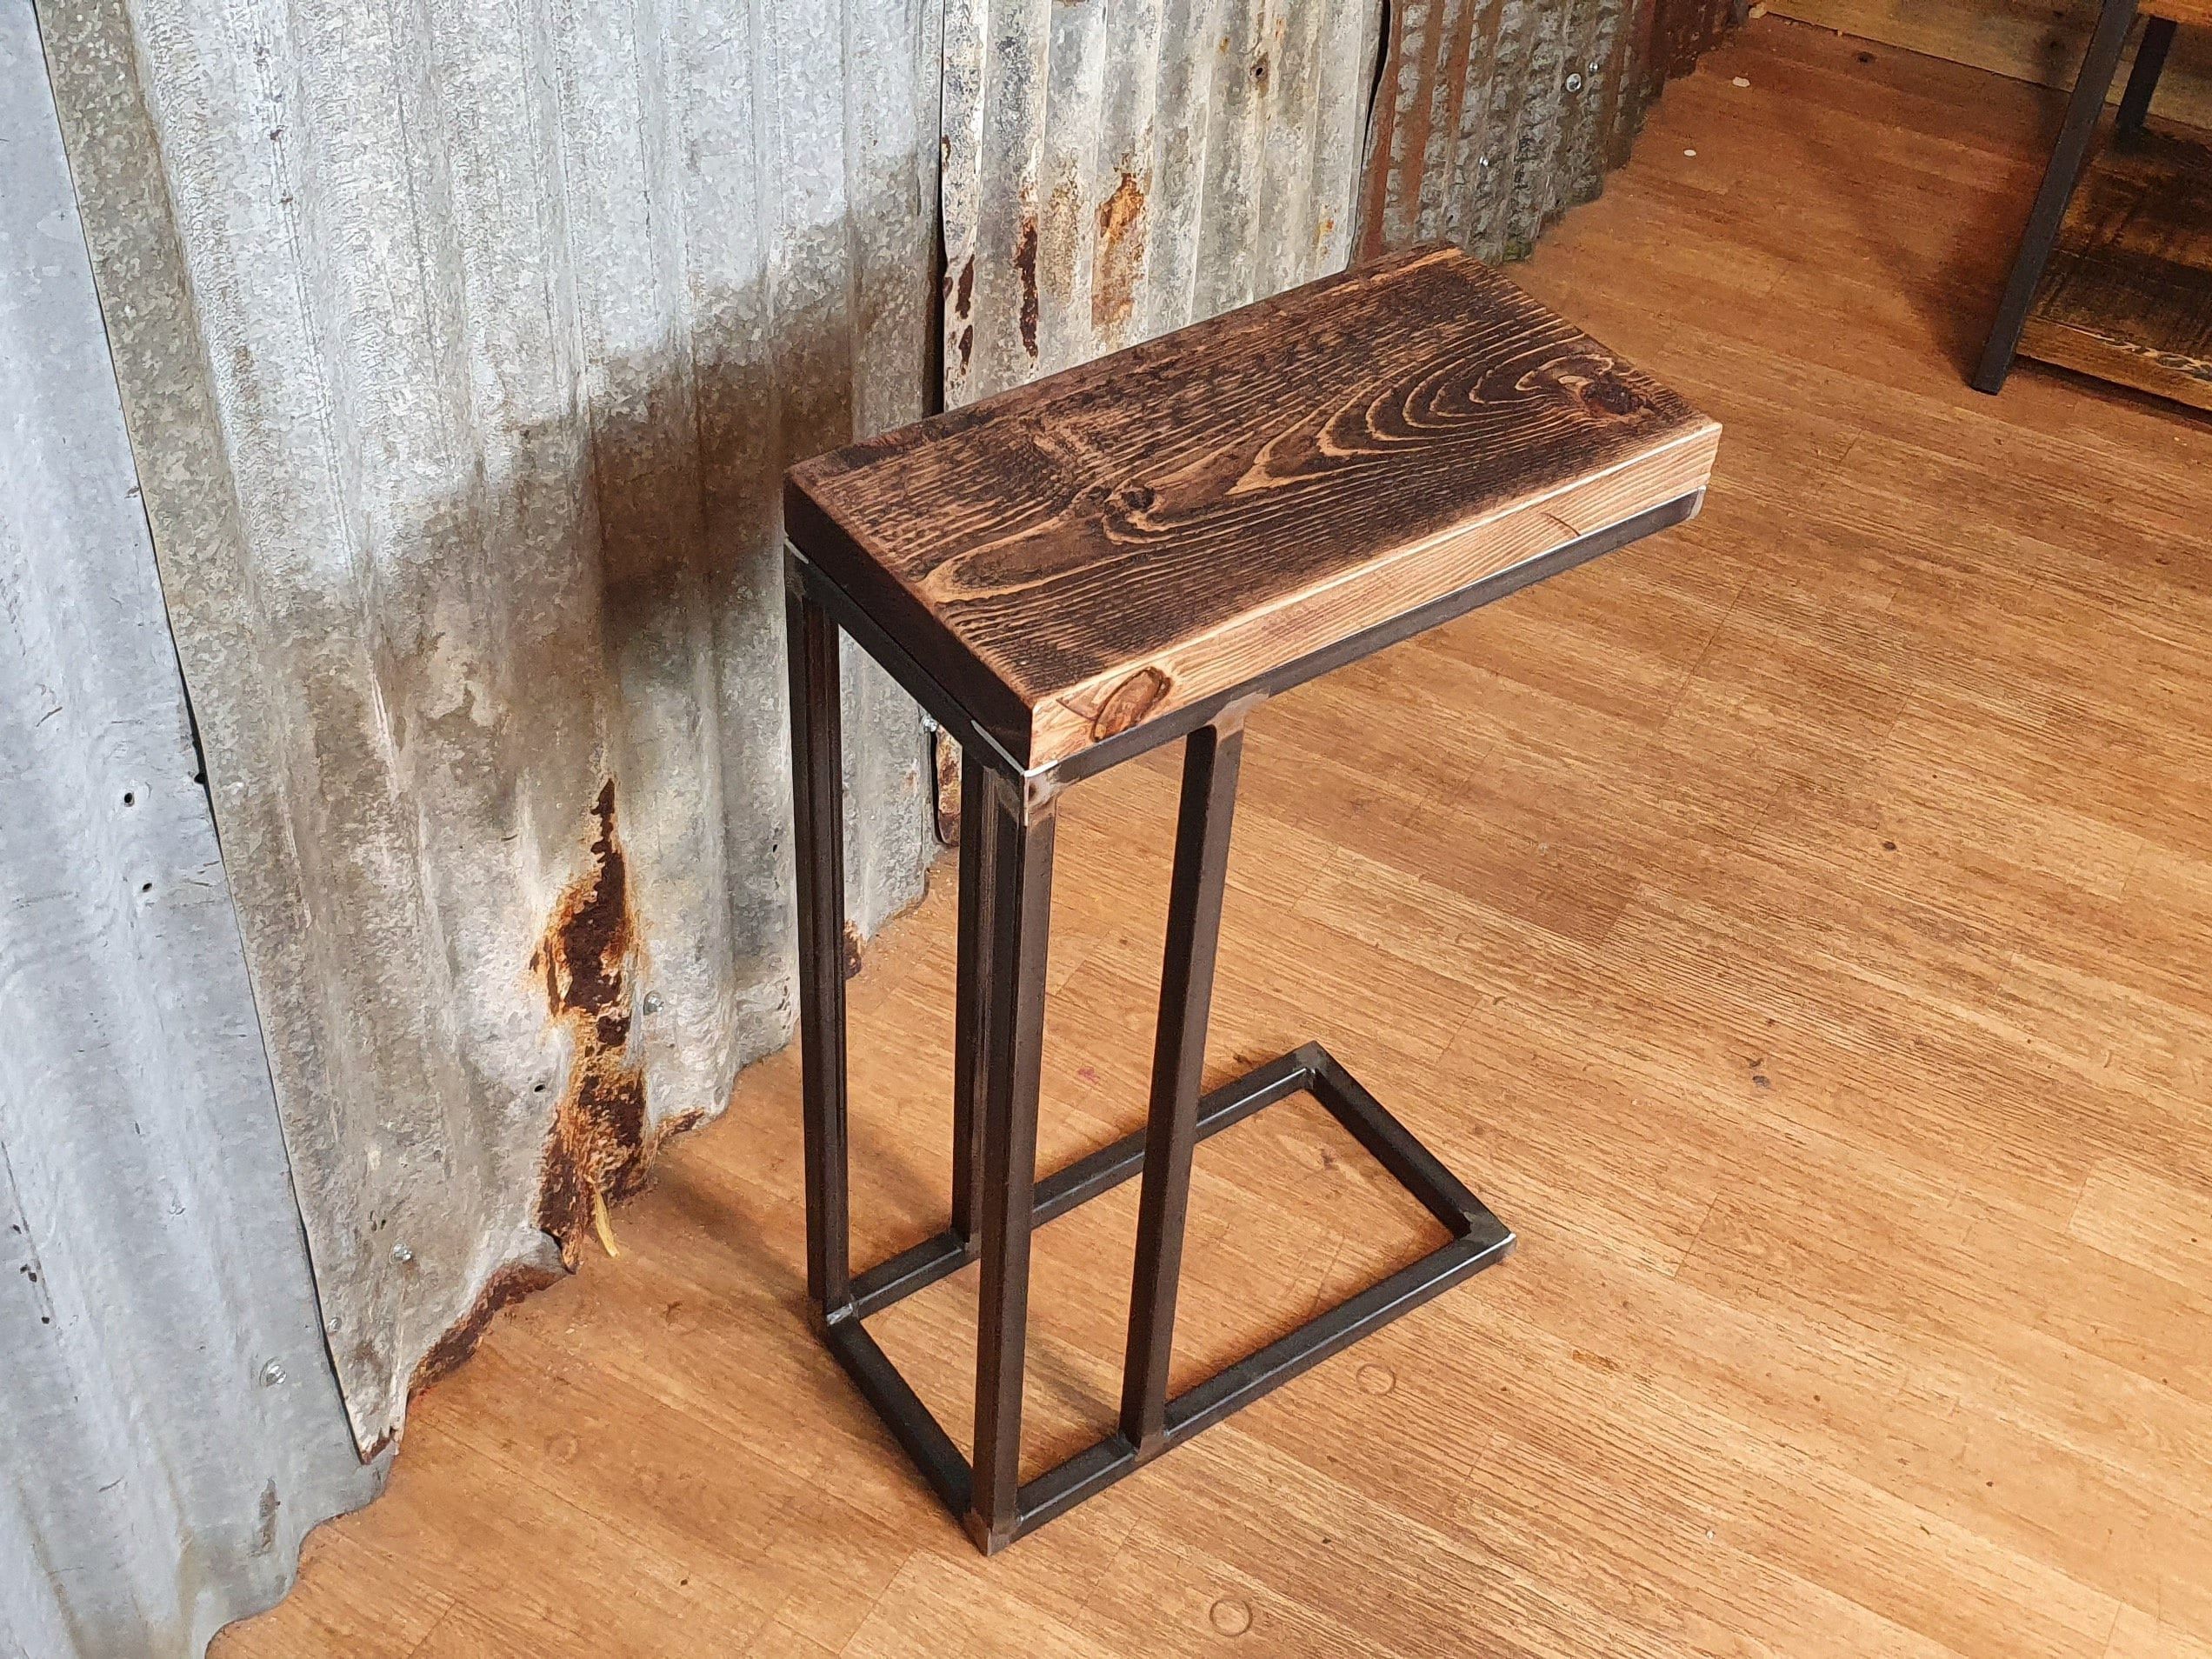 Rustic Industrial Sofa Side Table, Wooden C Shaped Lap Intended For Barnside Round Console Tables (View 6 of 20)